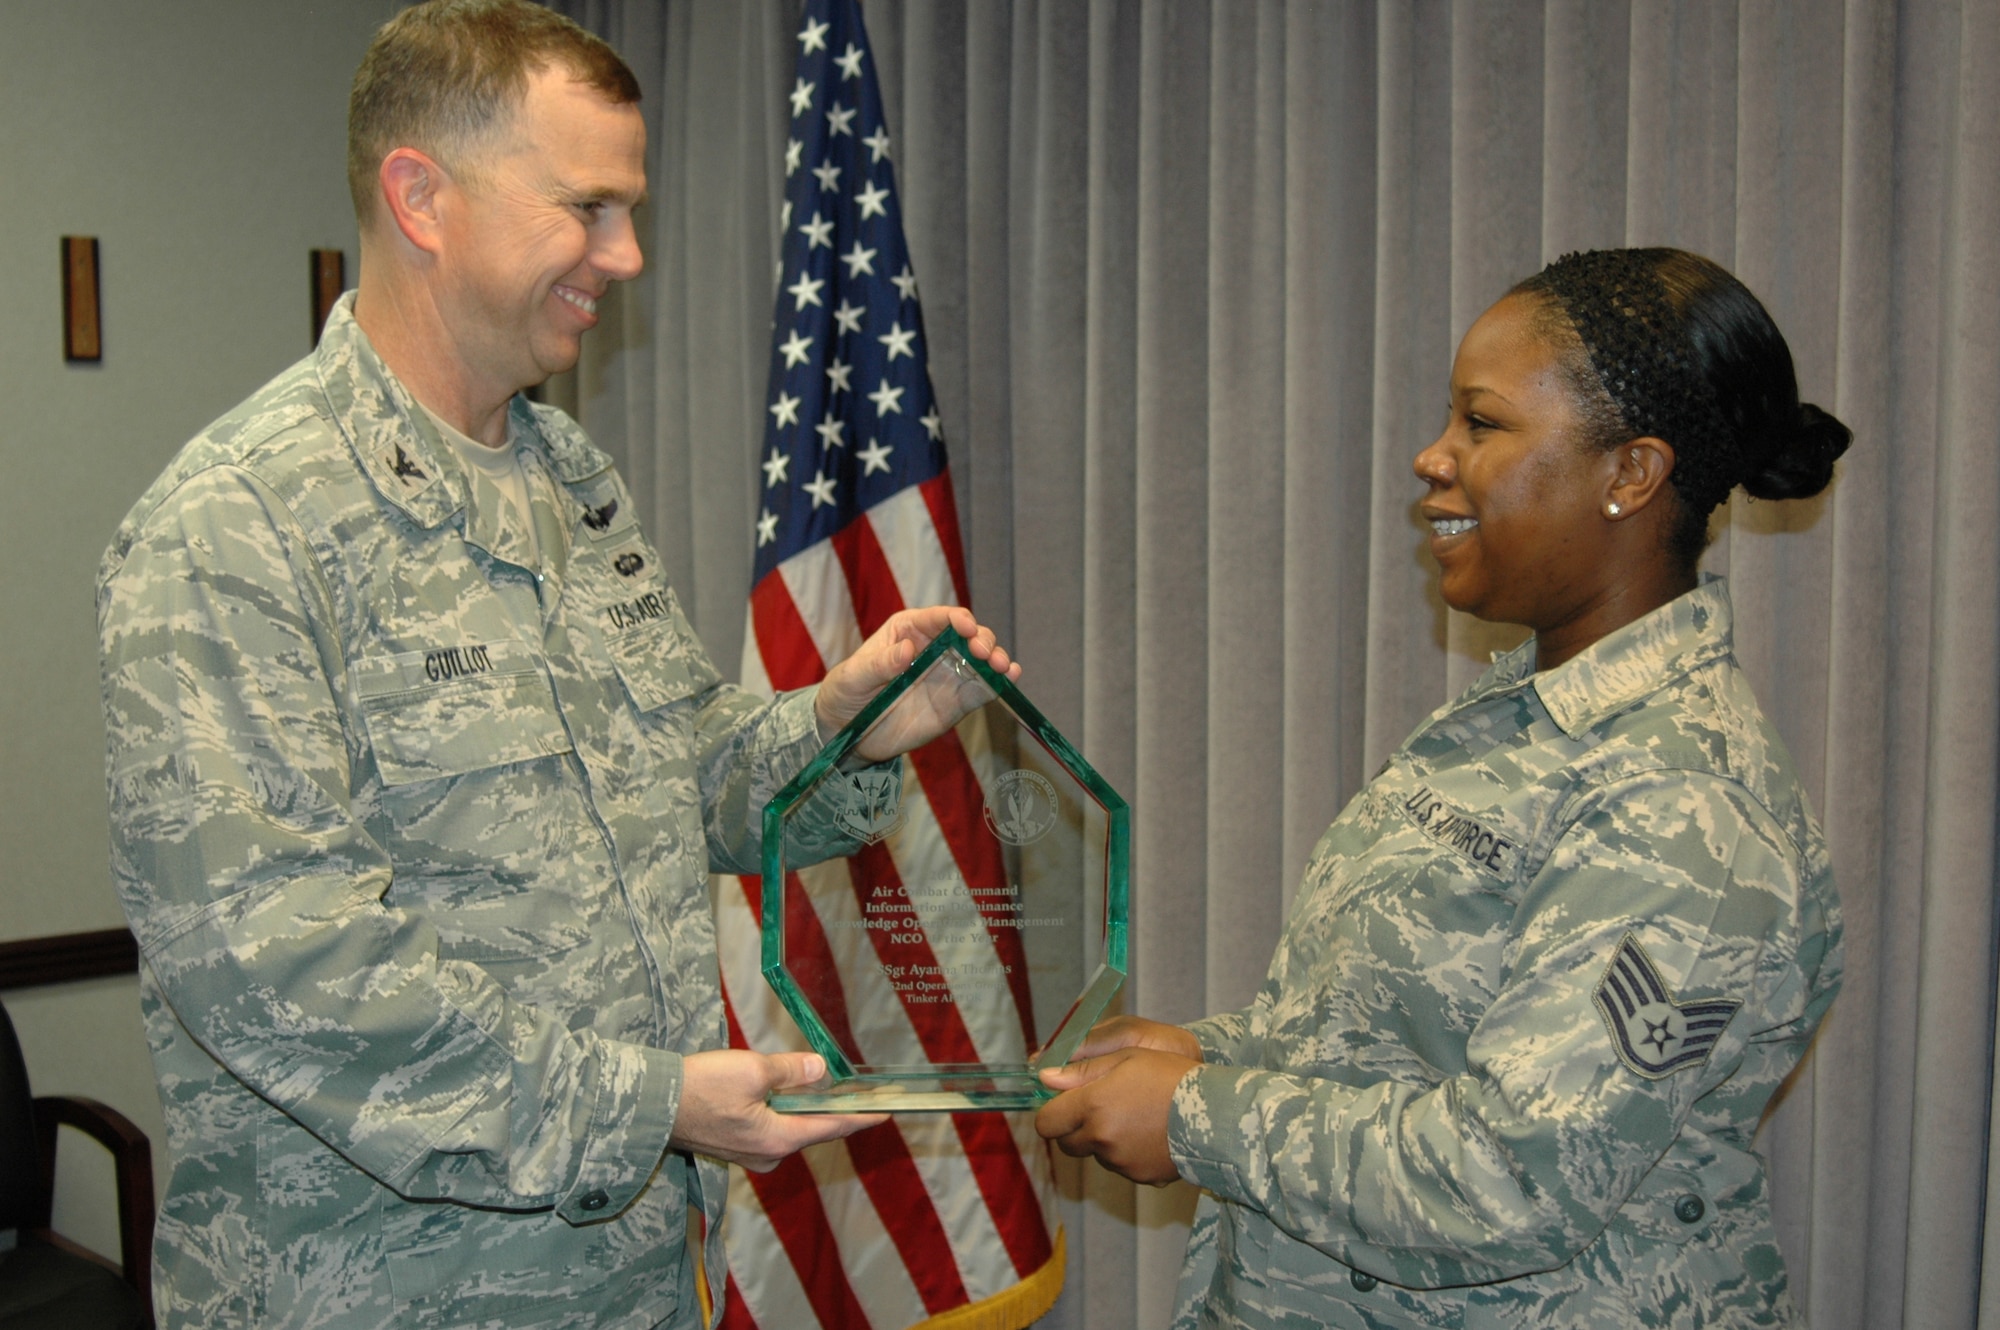 Col. Greg Guillot, 552nd Air Control Wing commander, presents Staff Sgt. Ayanna Thomas with the 2011 Air Combat Command Information Dominance Knowledge Operations Management Noncommissioned Officer of the Year Award prior to his bi-weekly staff meeting on Thursday, Sept. 6 in the 552nd ACW Conference Room. (Air Force photo by Darren D. Heusel)